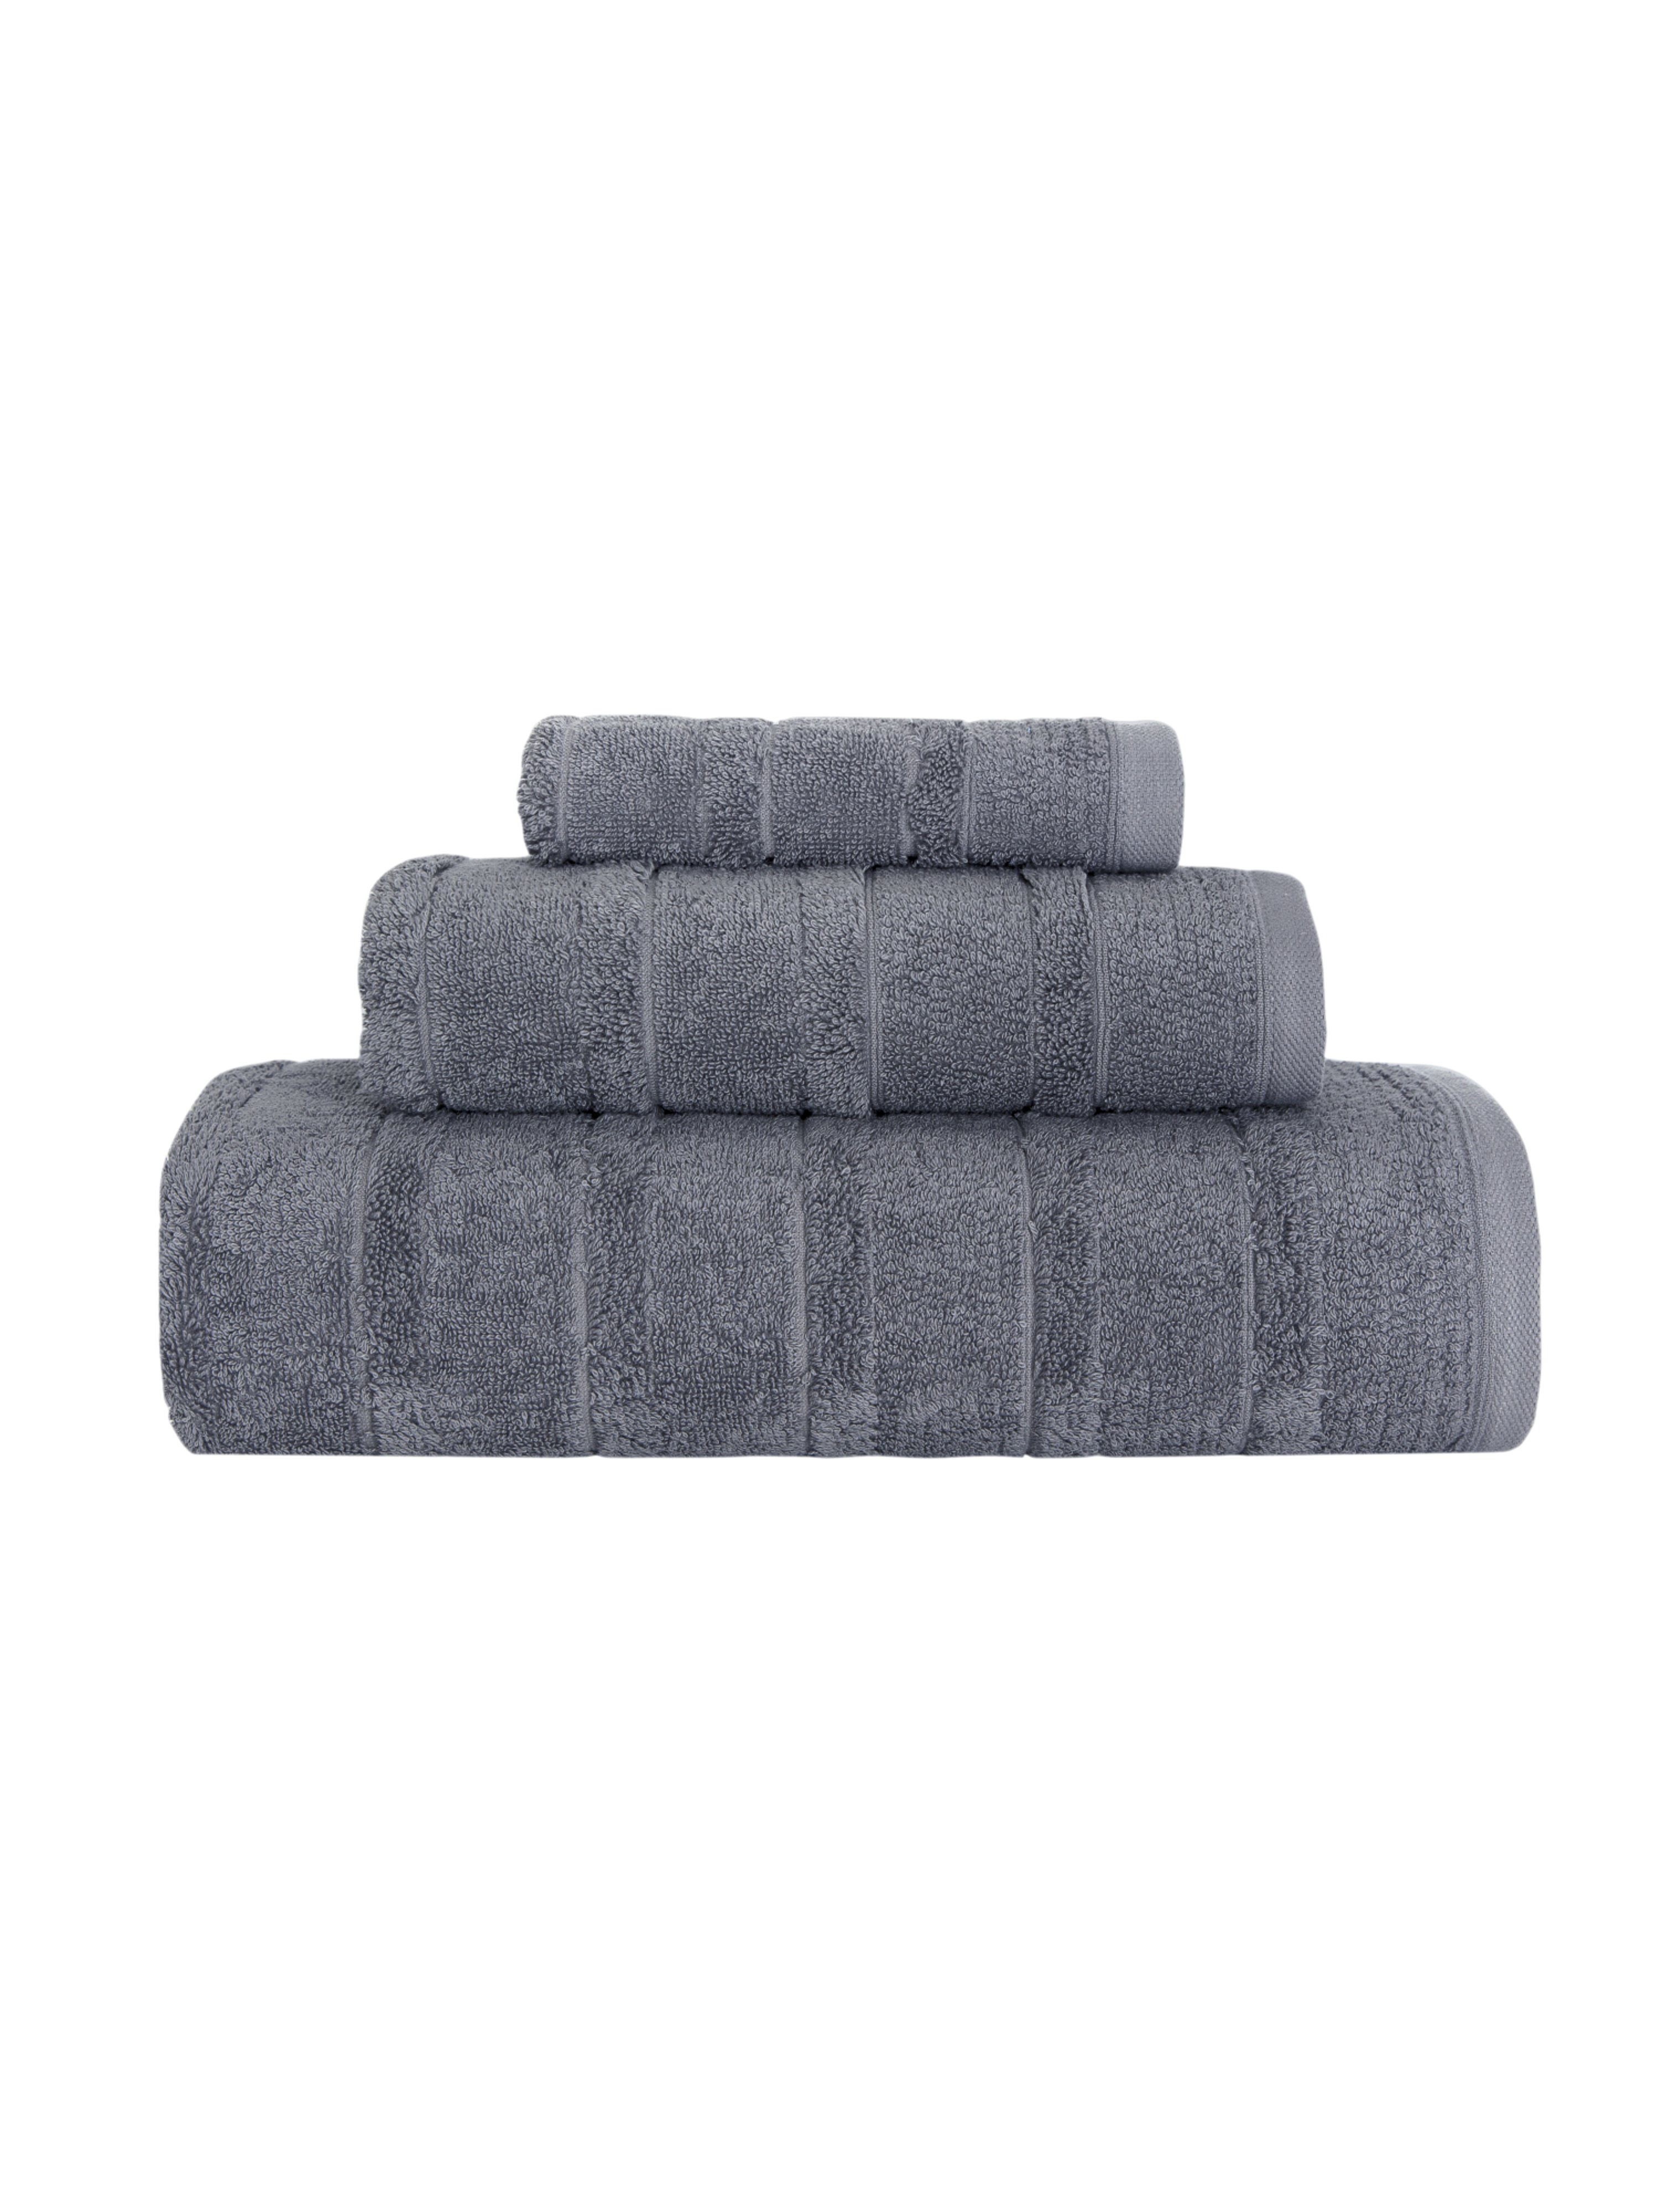 Classic Turkish Towels Genuine Cotton Soft Absorbent Carel And Garen 6 Piece  In Grey